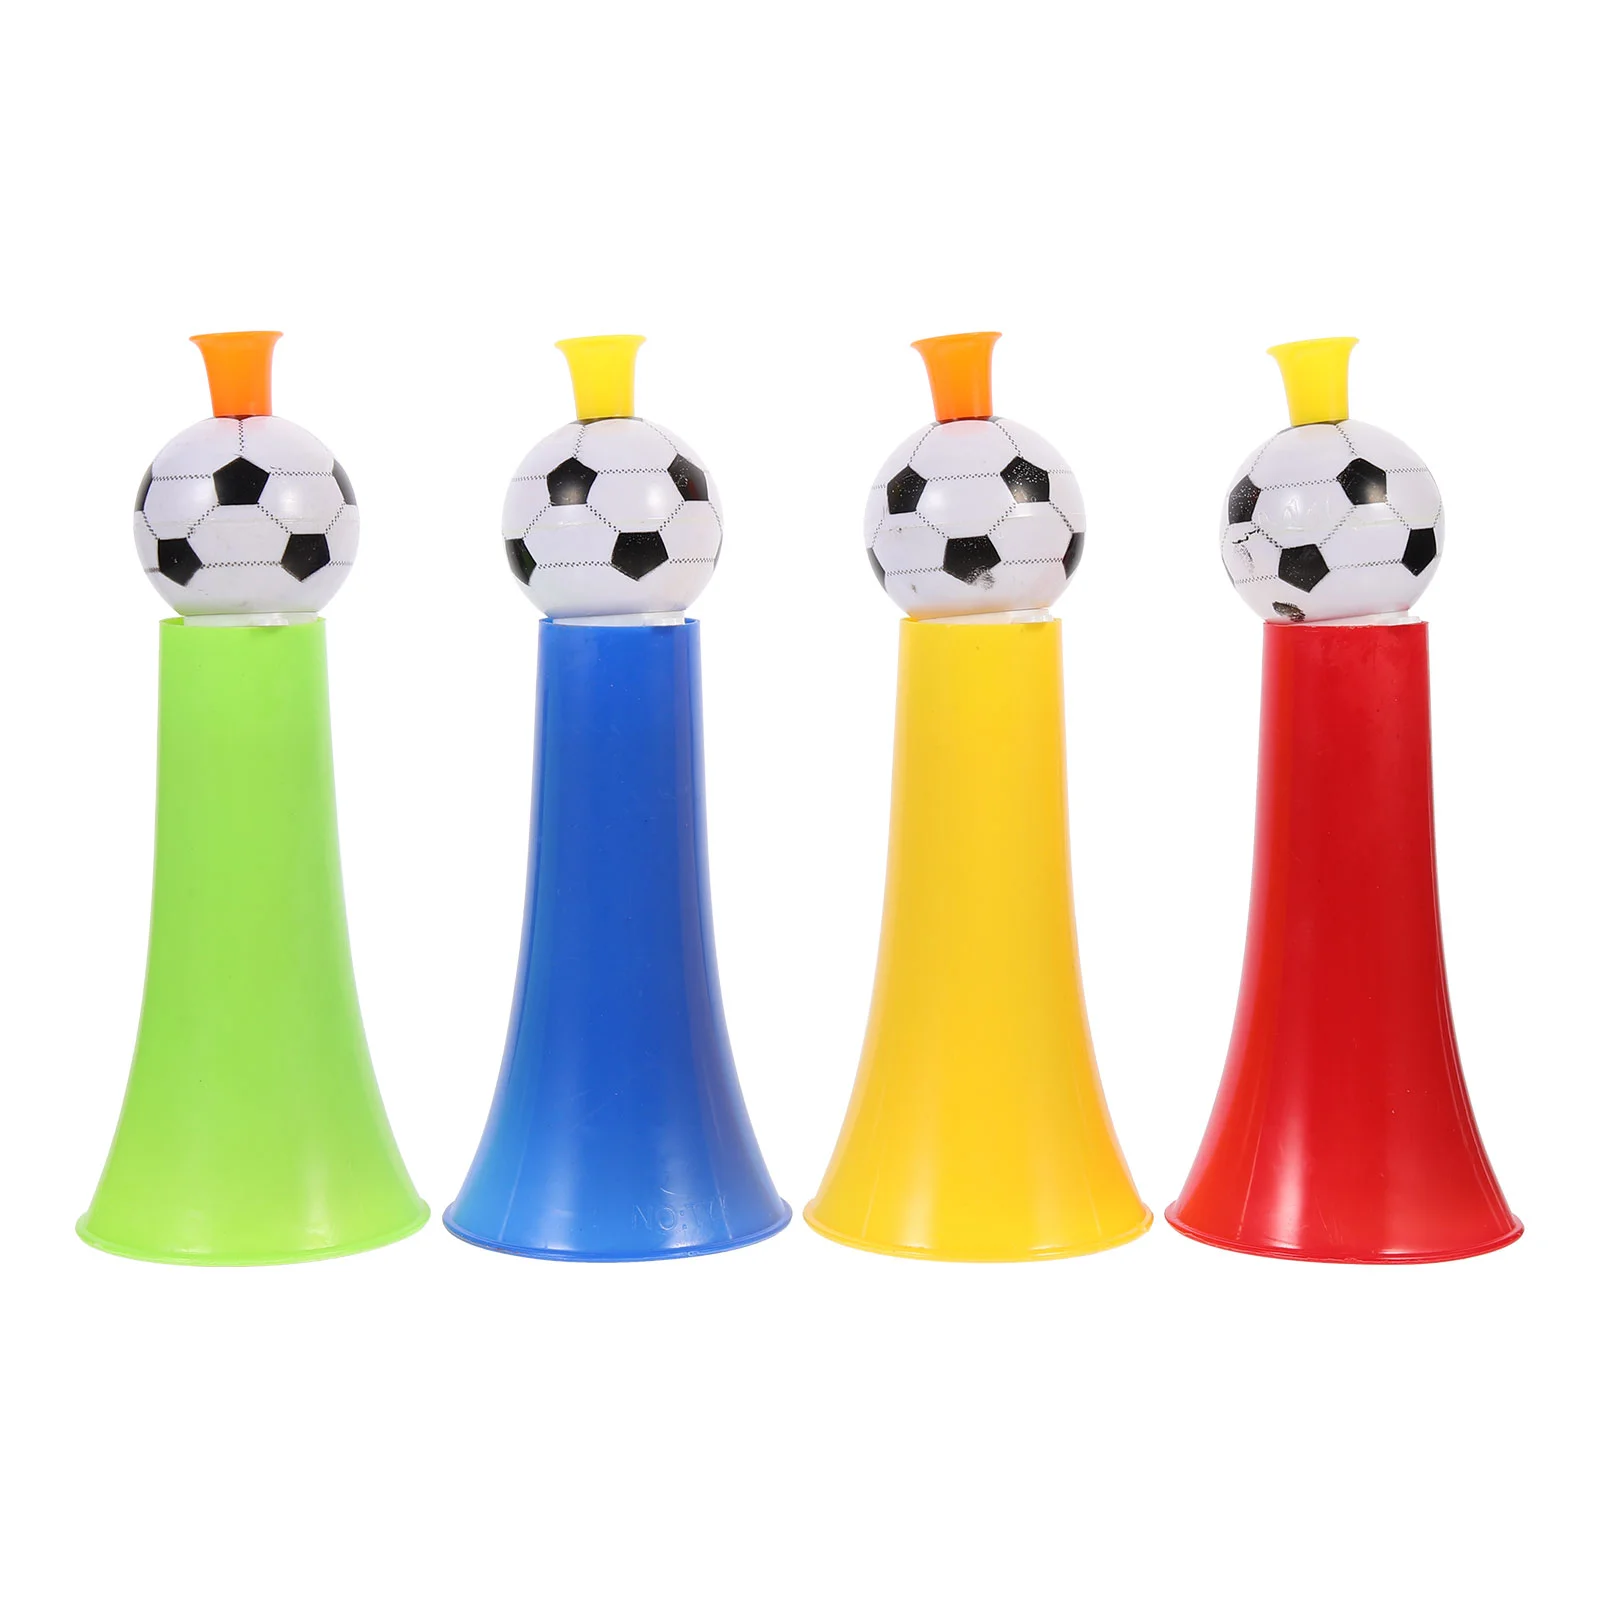 

Horn Trumpet Football Stadium Horns Toy Noise Toys Kids Maker Game Cheering Soccer Party Air Saxophone Fans Instruments Wind